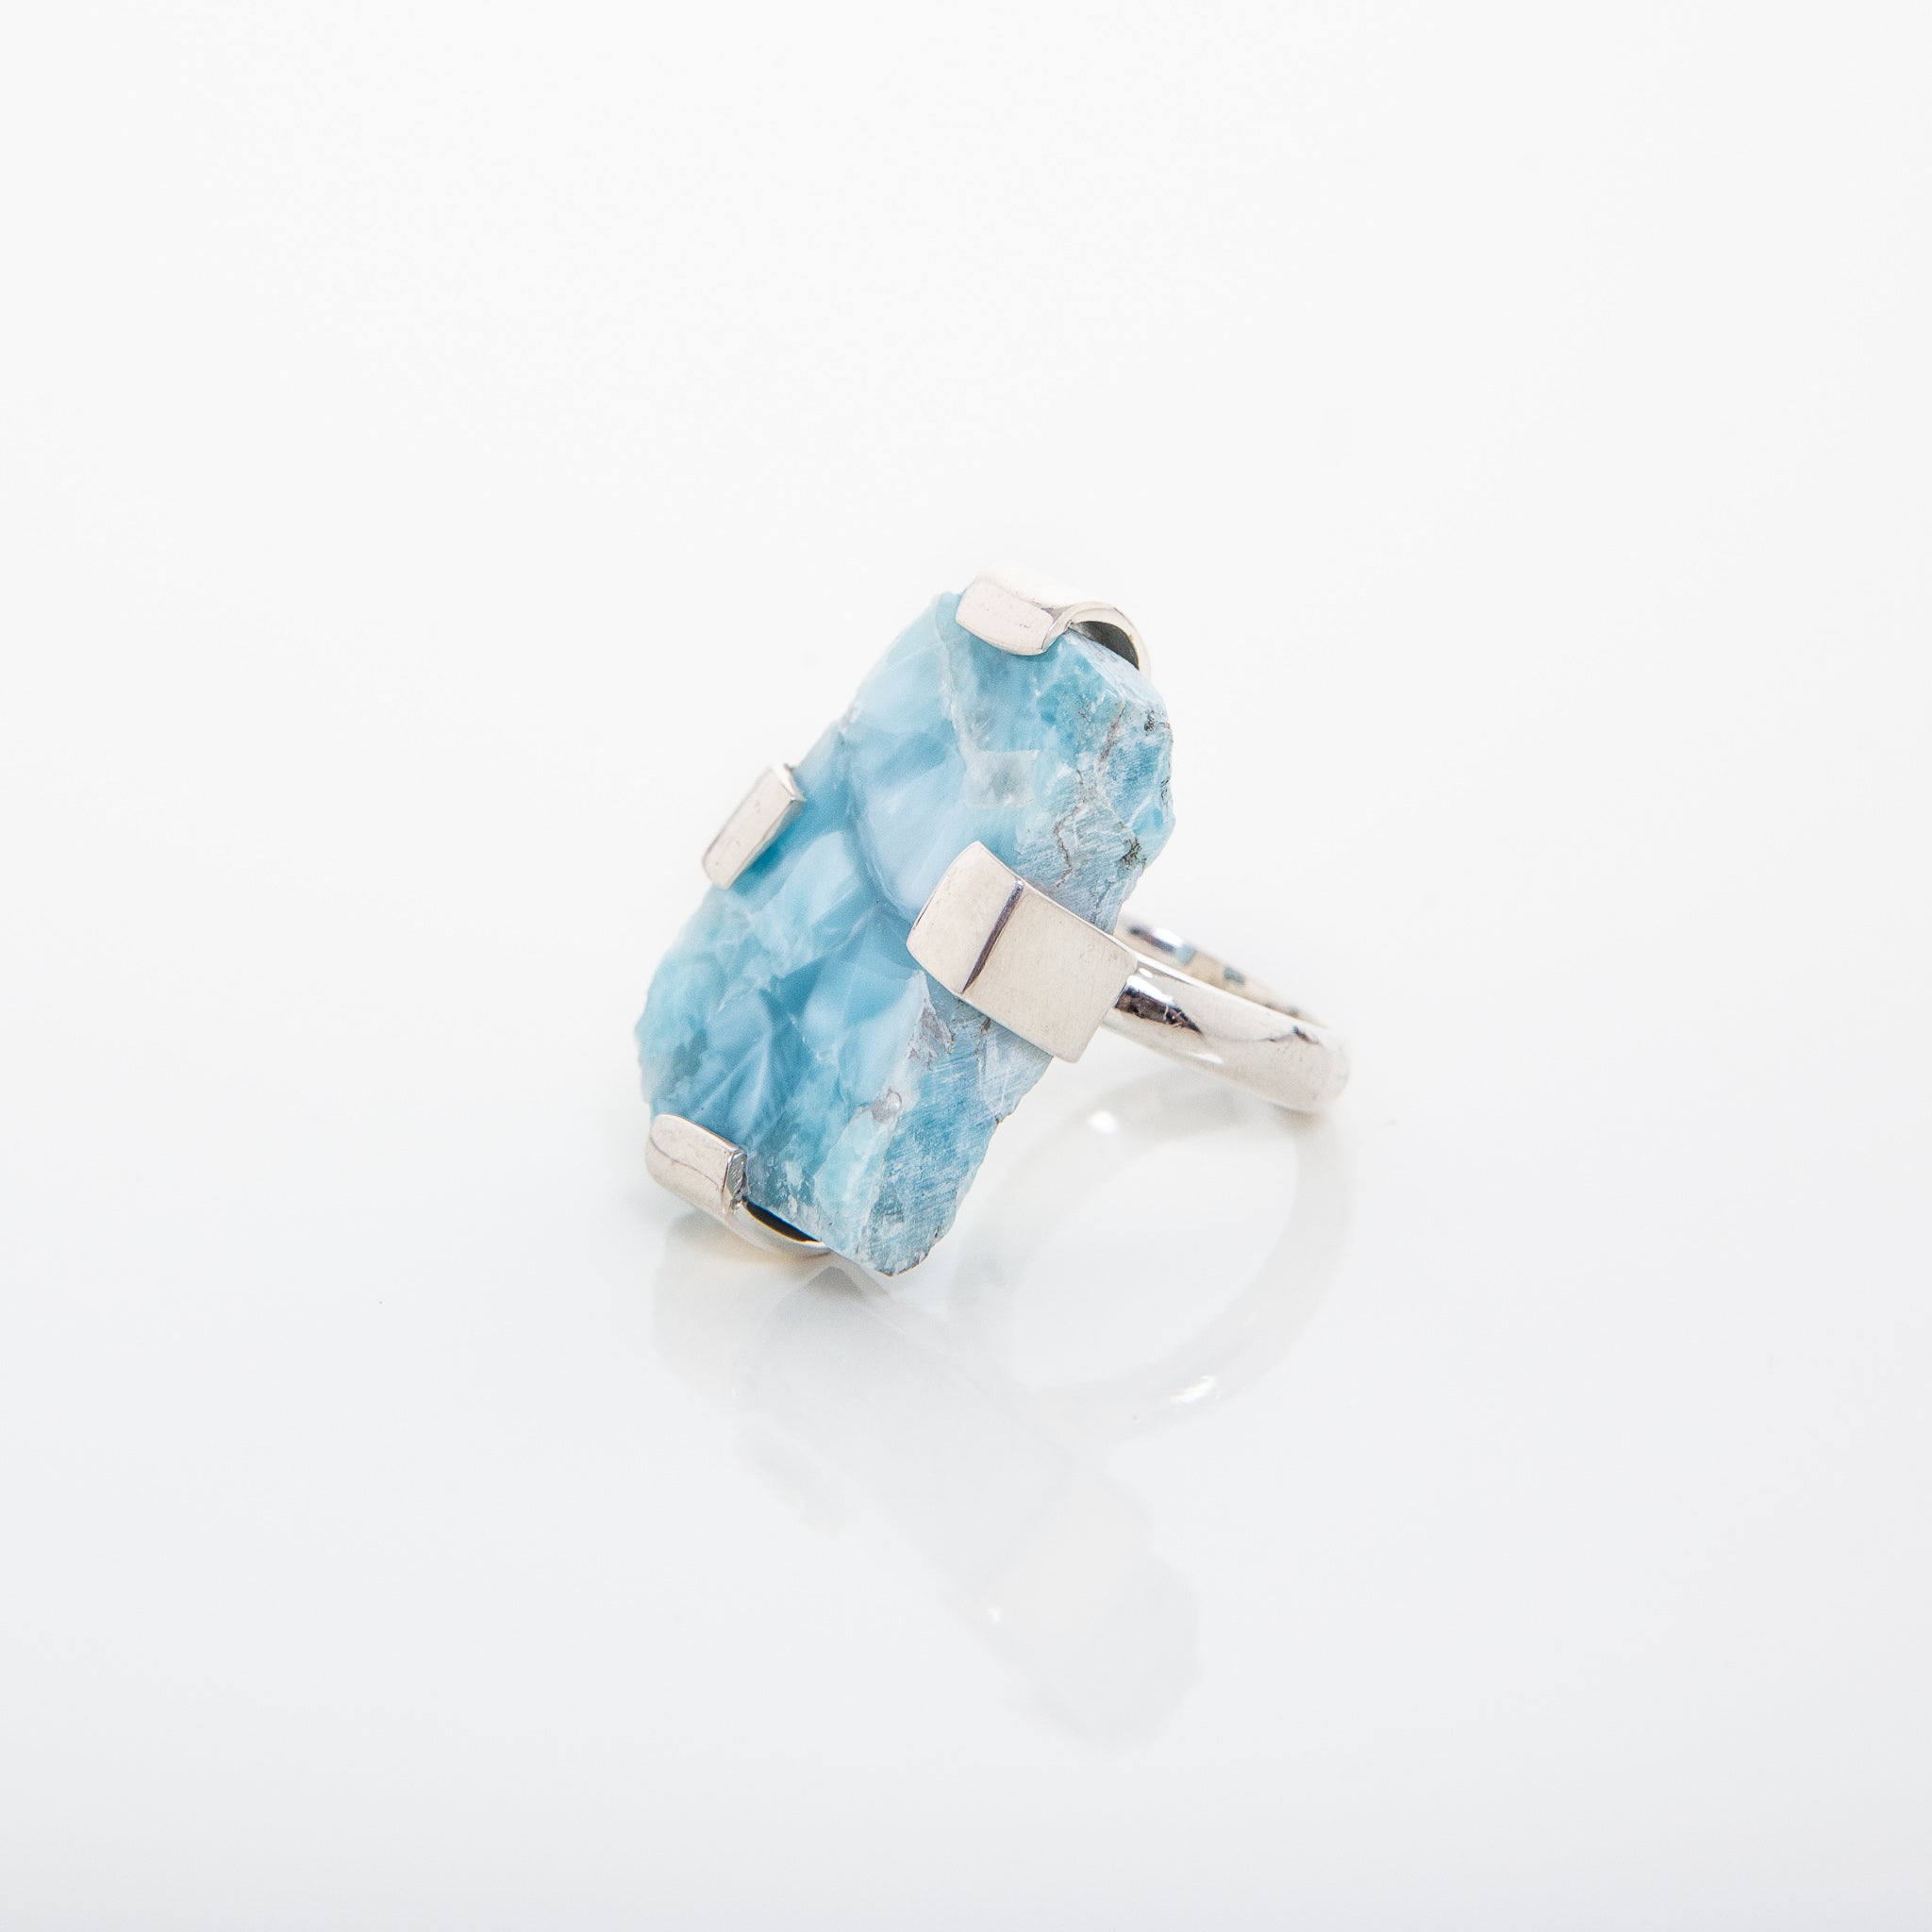 Rough Larimar stone Ring Xime handmade by The Larimar Shop in the Dominican Republic.